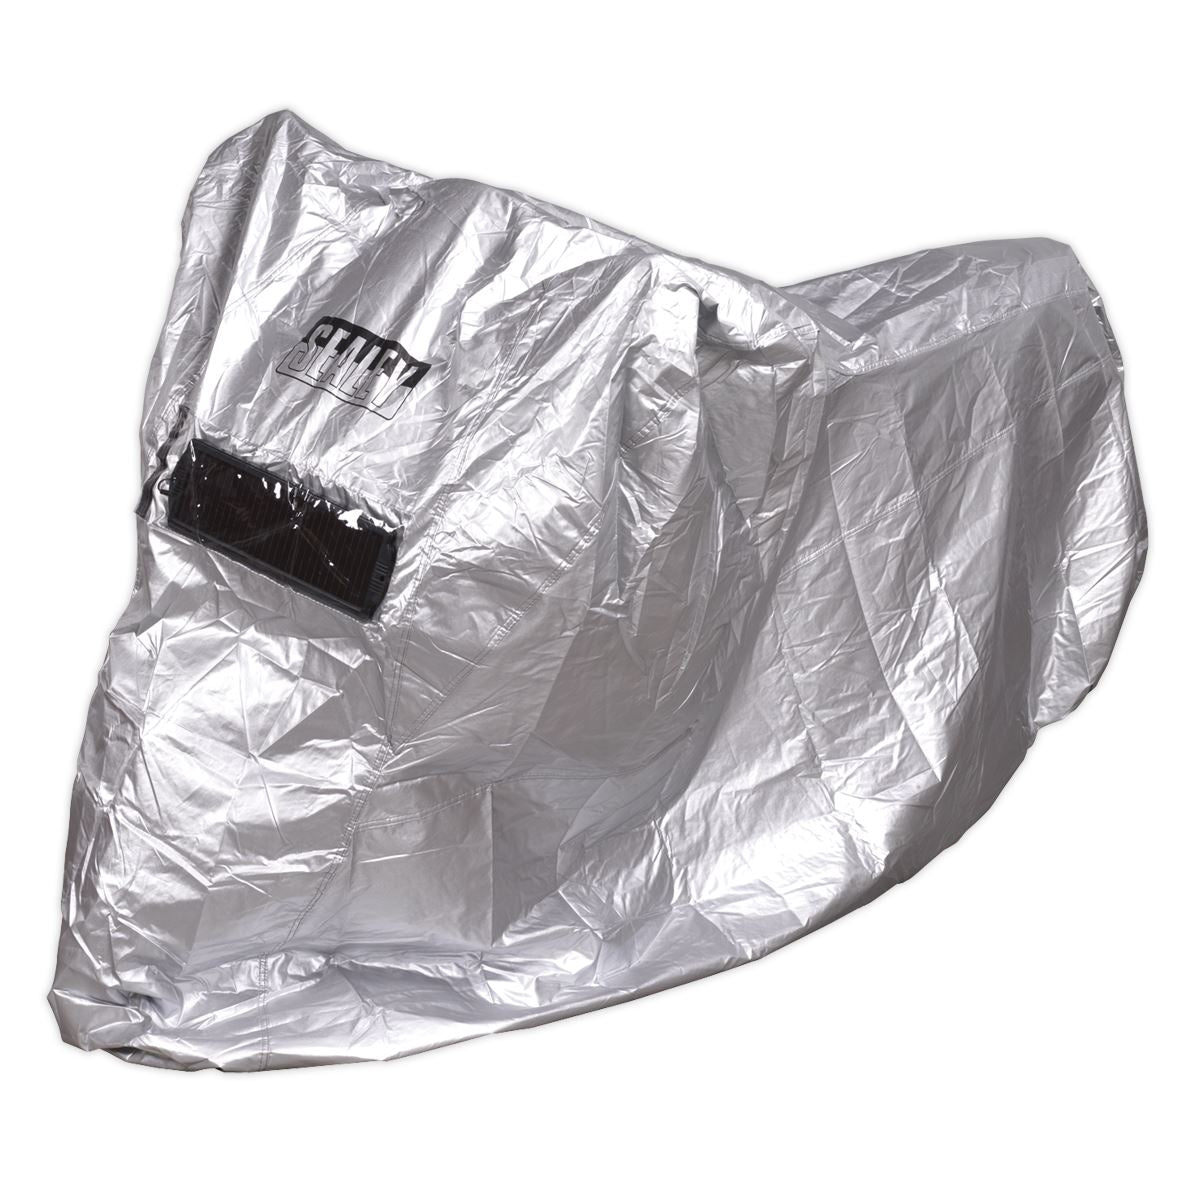 Sealey Motorcycle Cover Large 2460 x 1050 x 1370mm